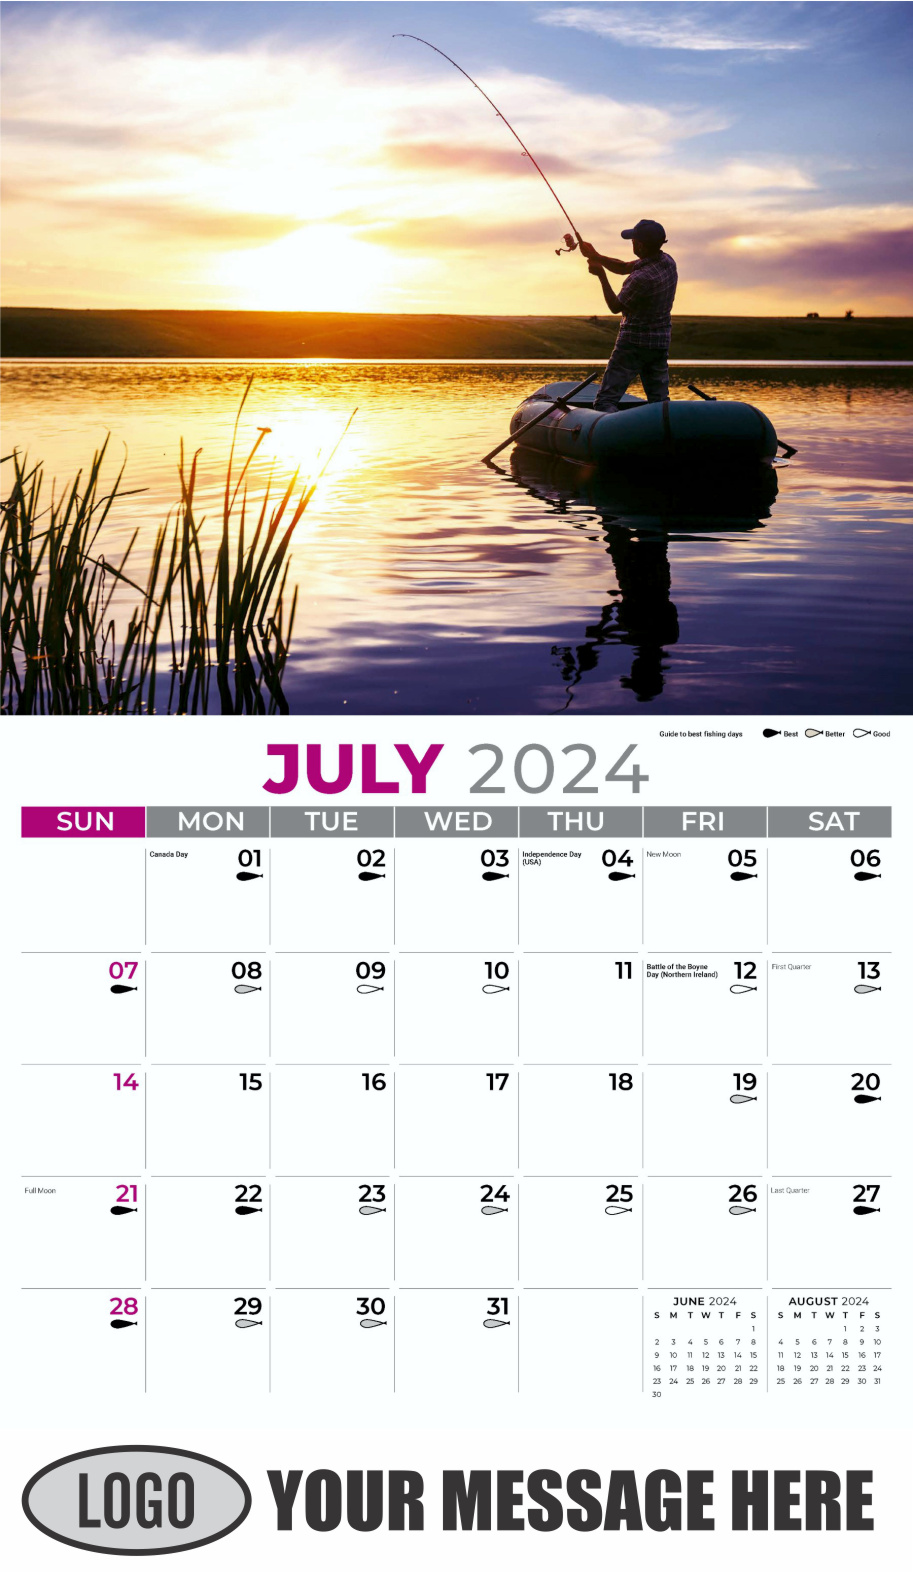 Fishing and Hunting 2024 Business Promotion Calendar - July